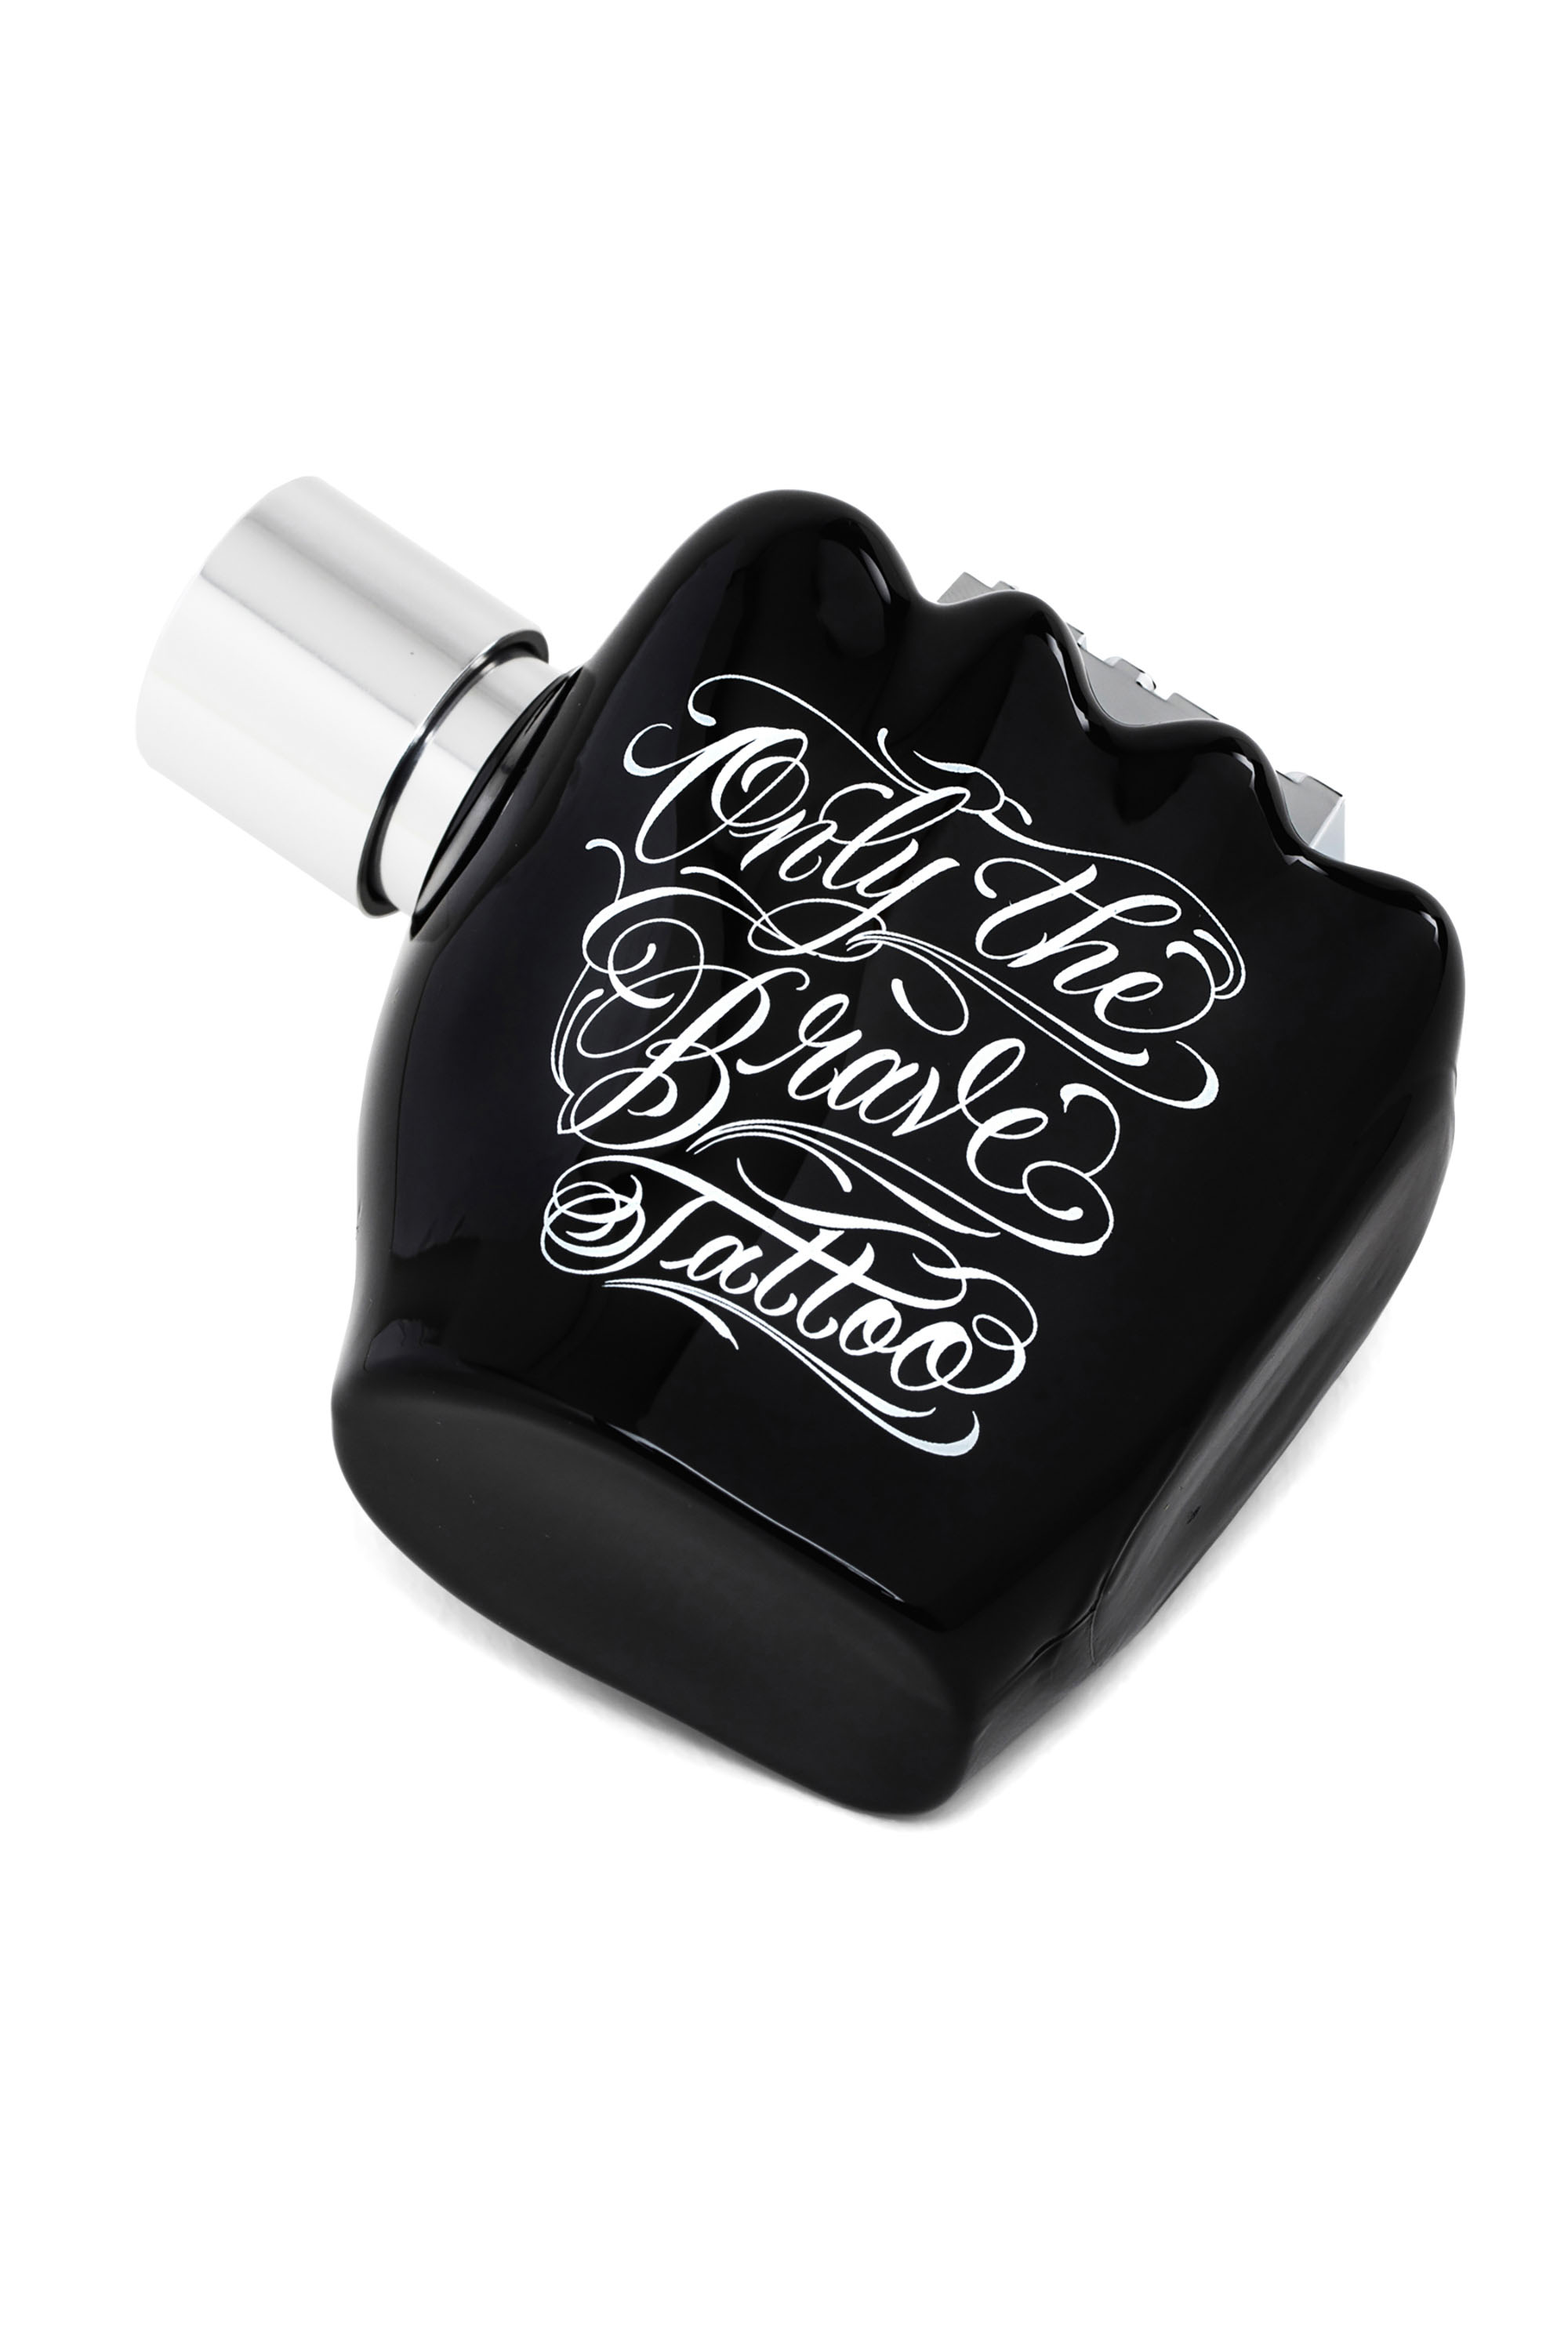 Diesel - ONLY THE BRAVE TATTOO 50 ML, Man Only the brave tattoo 50ml, eau de toilette in Black - Image 3